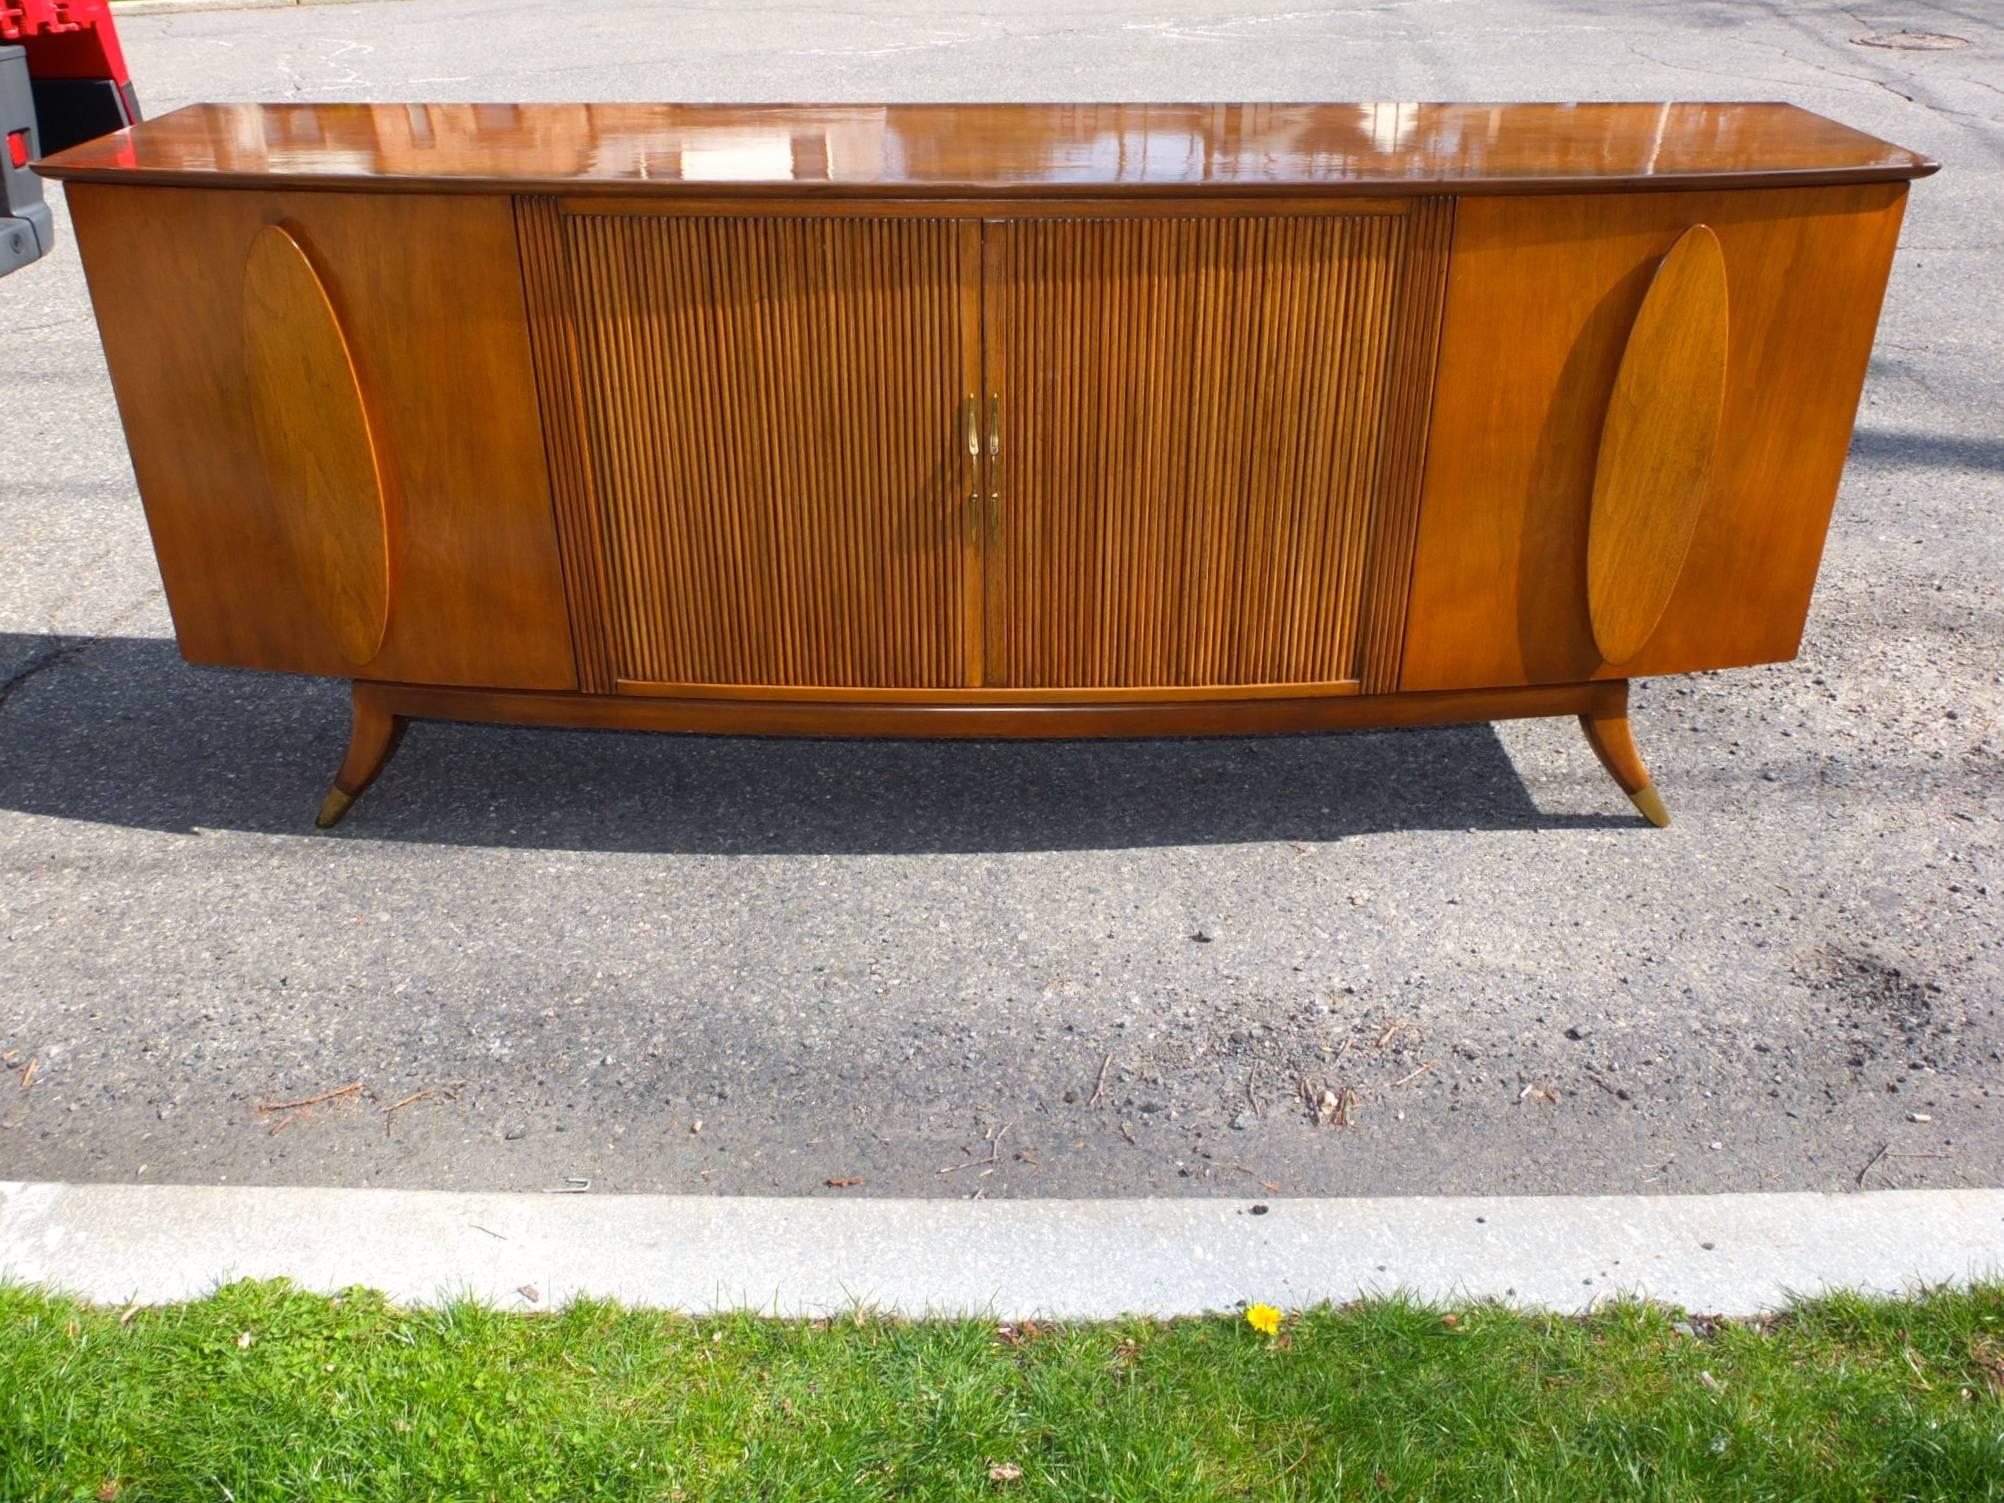 SATURDAY SALE

Long bow-fronted credenza sideboard in walnut with two cabinet doors and four drawers behind sliding tambour doors with brass pulls. The top two drawers are lined and divided for silverware. The two side cabinets each have two